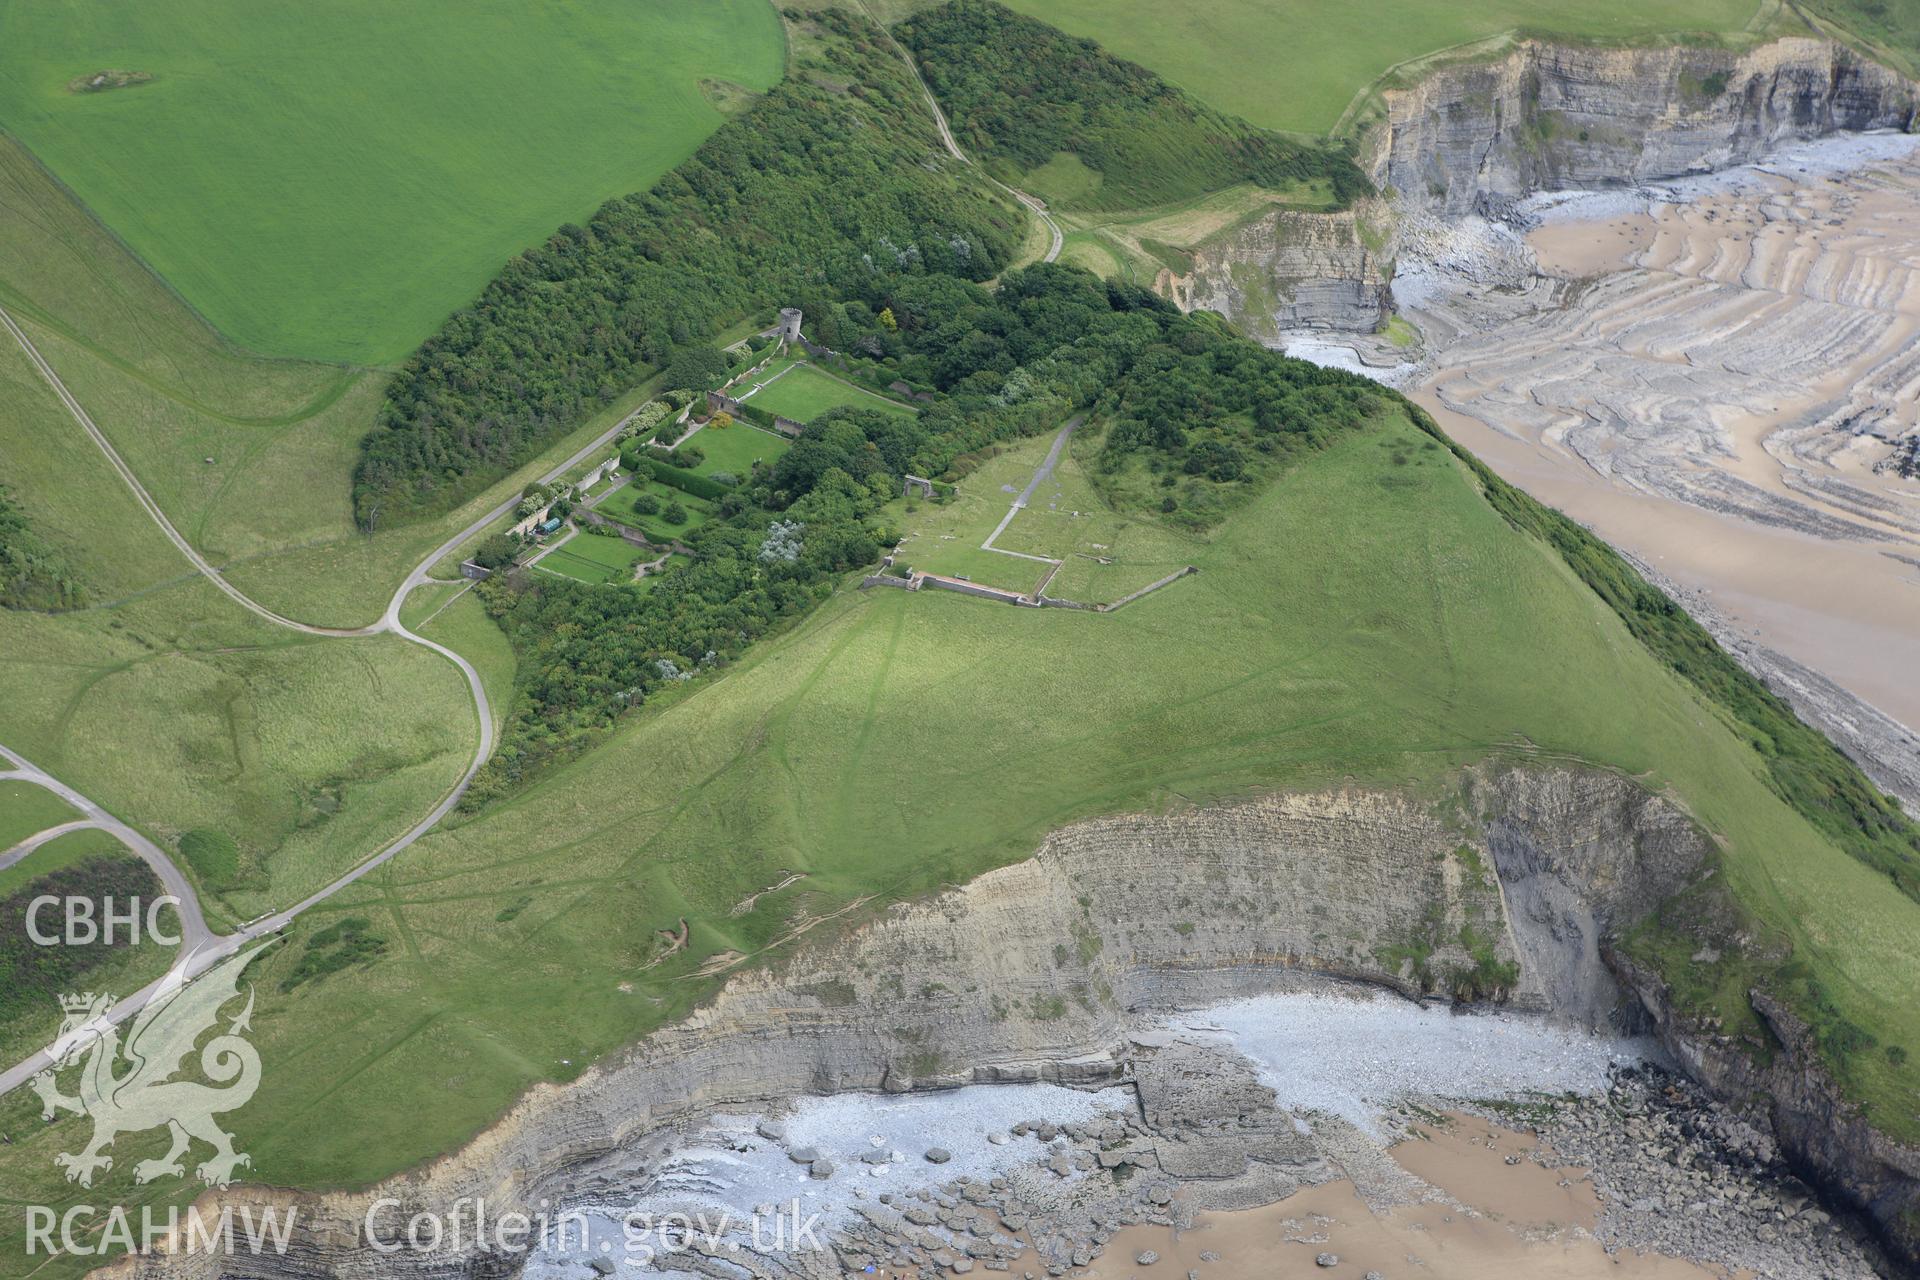 RCAHMW colour oblique aerial photograph of Dunraven Hillfort. Taken on 09 July 2009 by Toby Driver